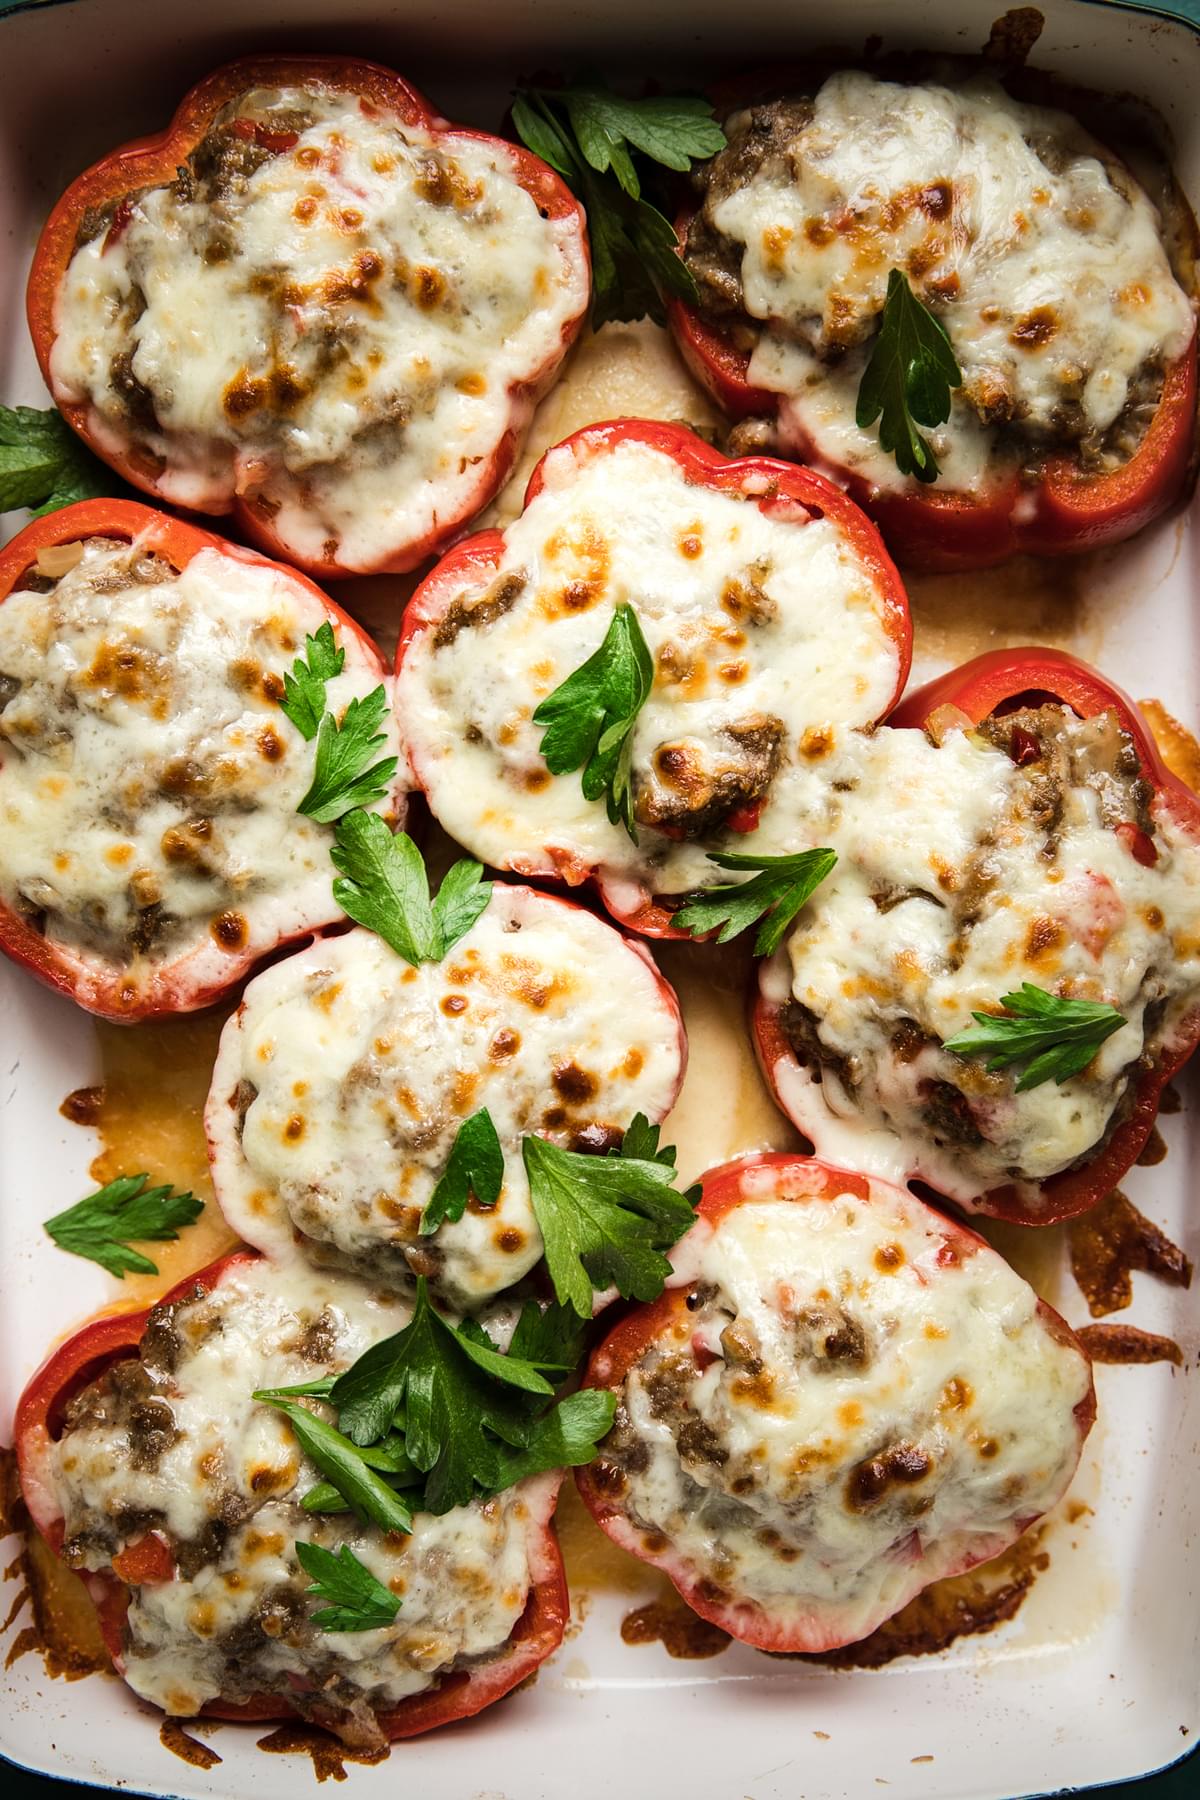 Homemade Meatball Stuffed Peppers topped with melted cheese and parsley garnish in a baking dish